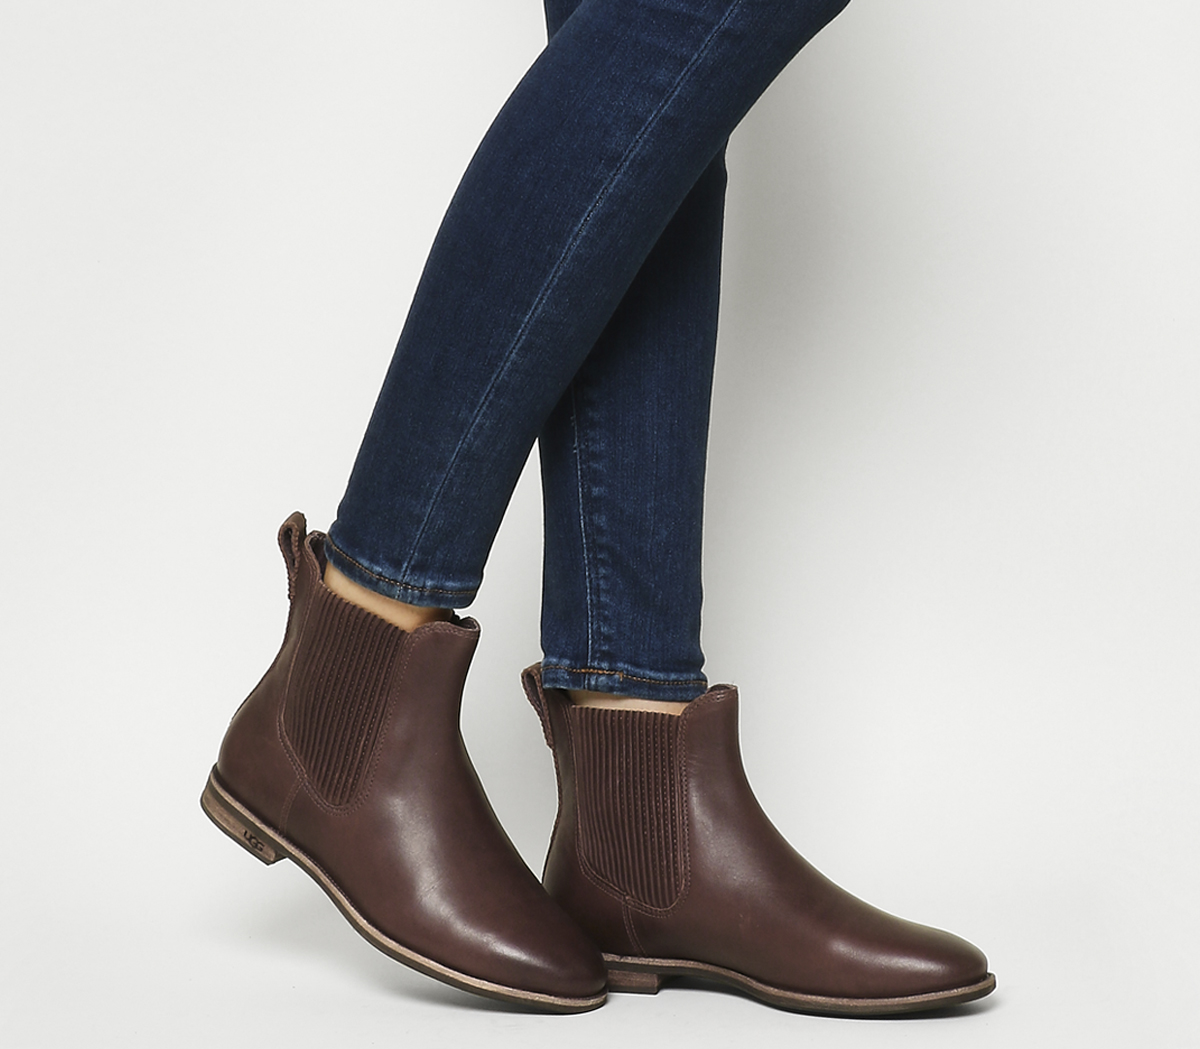 UGG Joey Chelsea Boot Chestnut Leather 